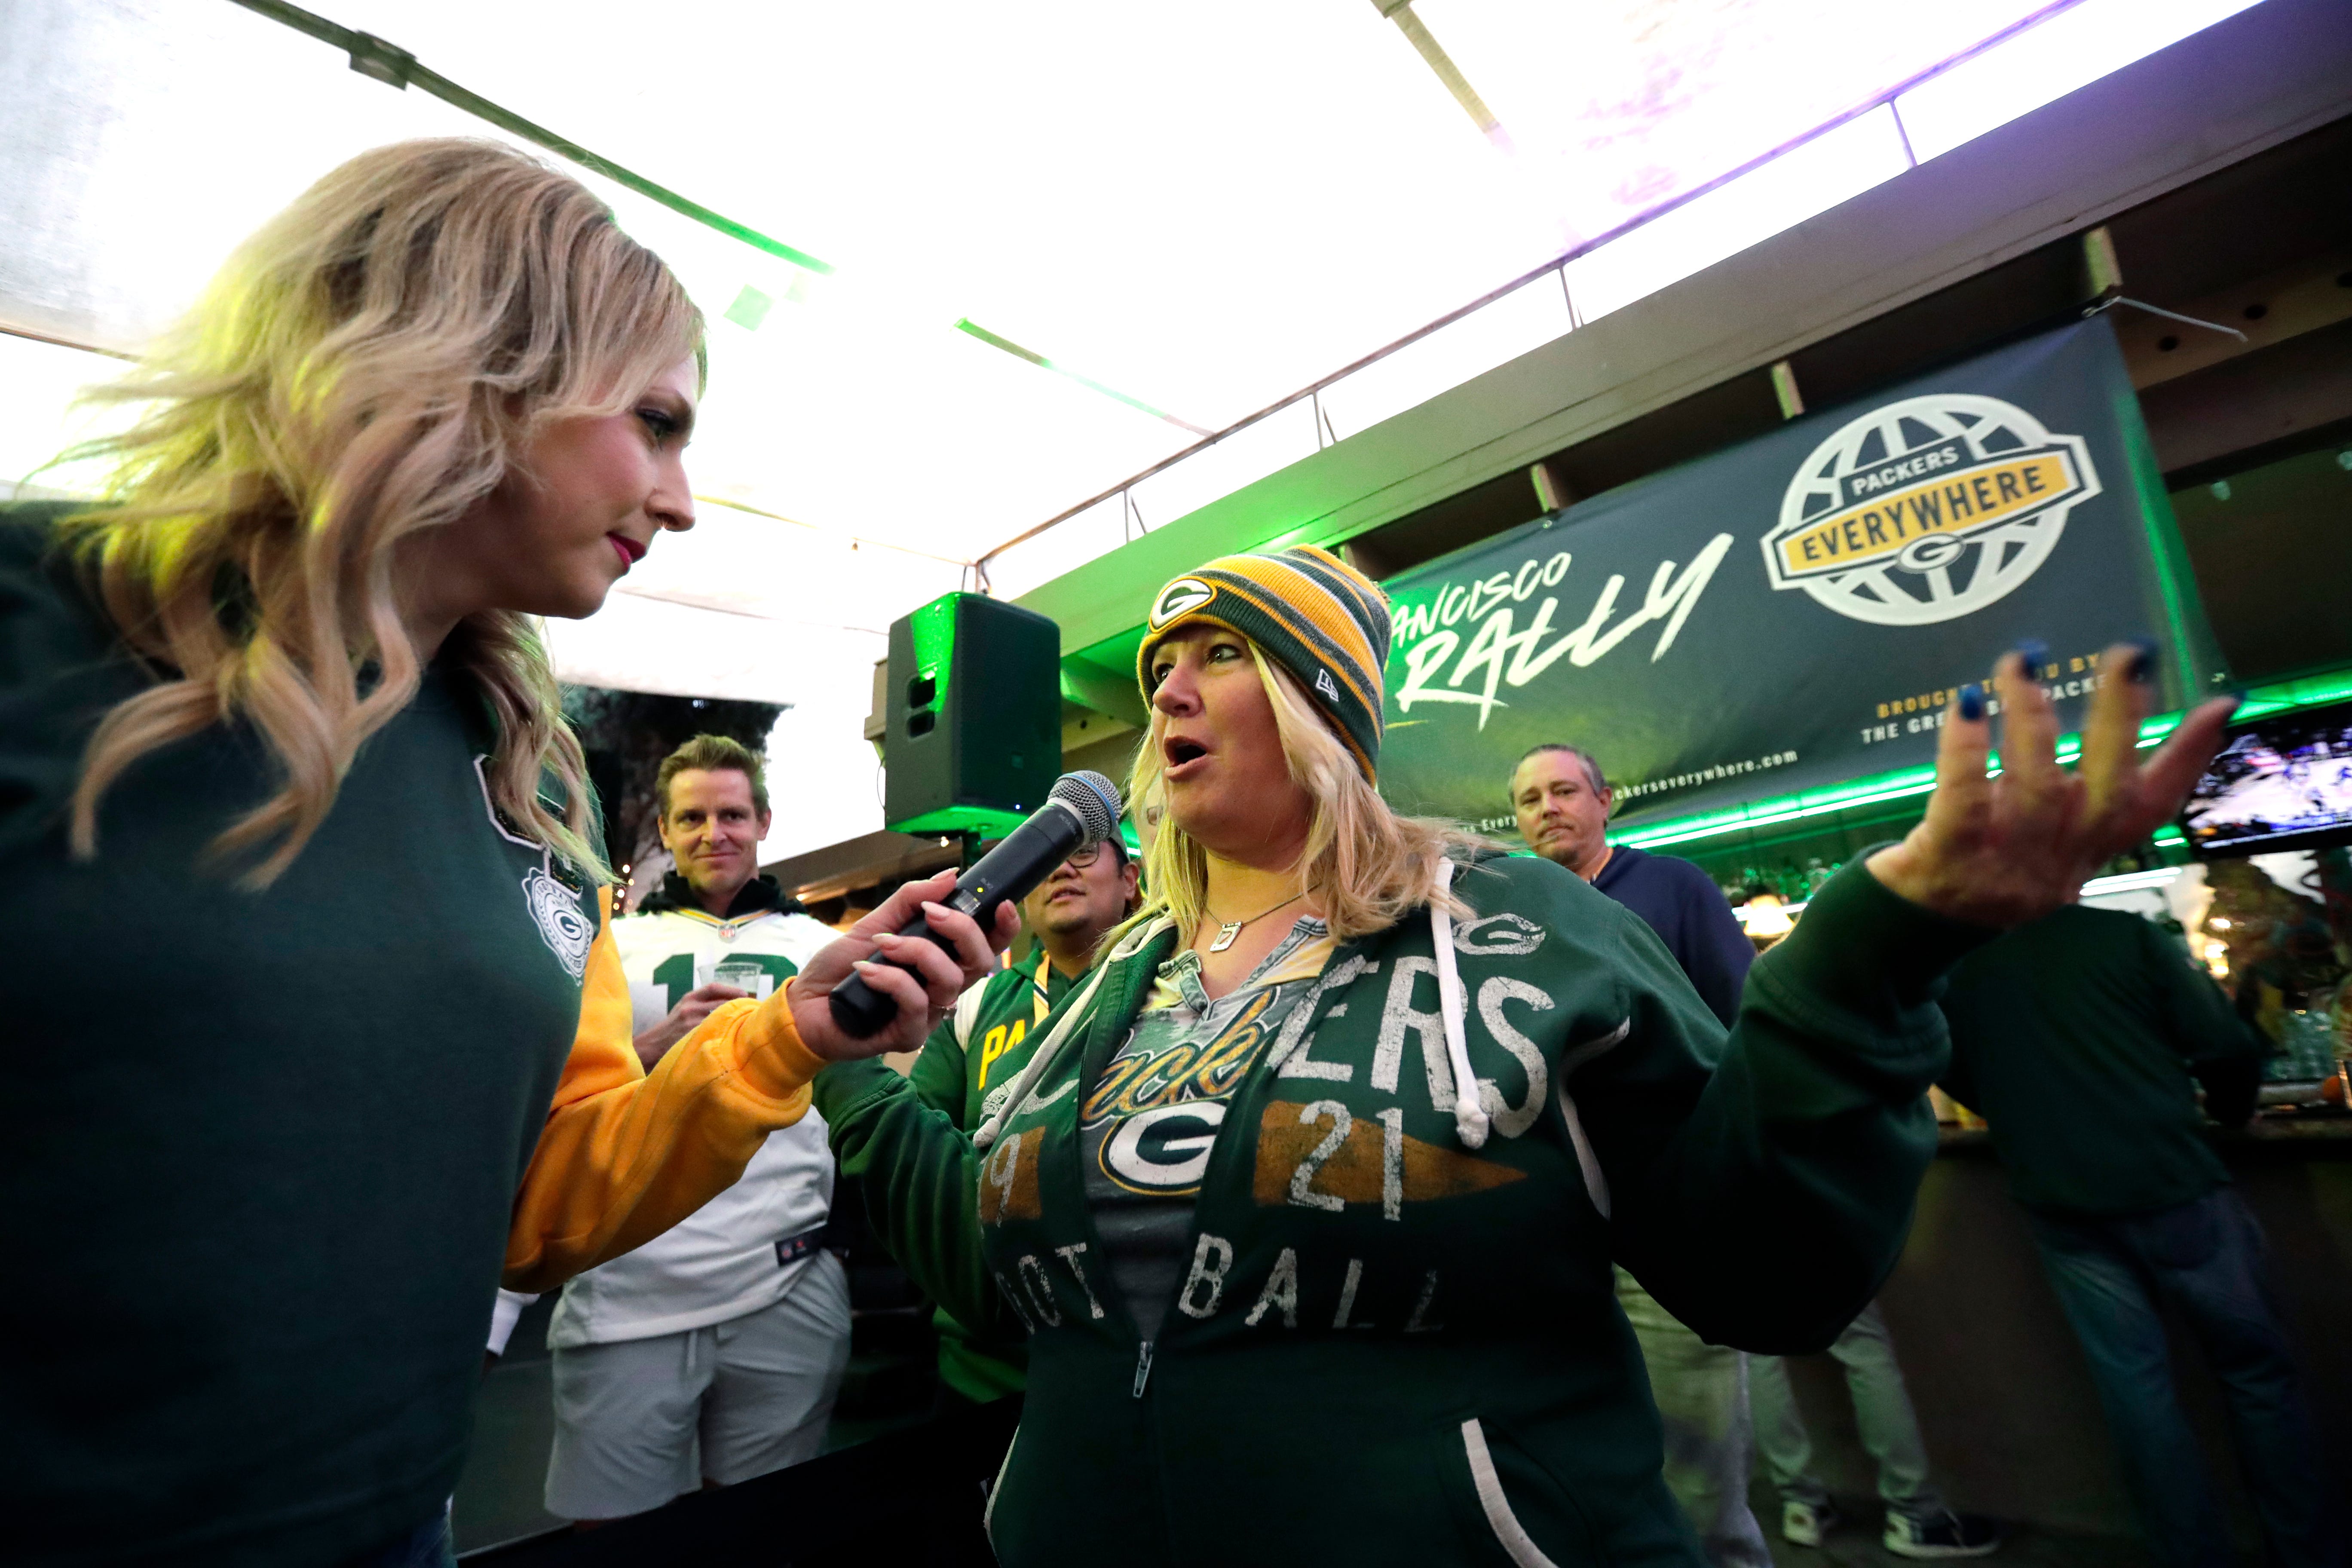 Packers Everywhere host Rebecca Zaccard, left, taks with Shelly Seebeck of Las Vegas, Nevada, during the Packers Everywhere pep rally Friday, January 19, 2024, at The Patio in Palo Alto, California.